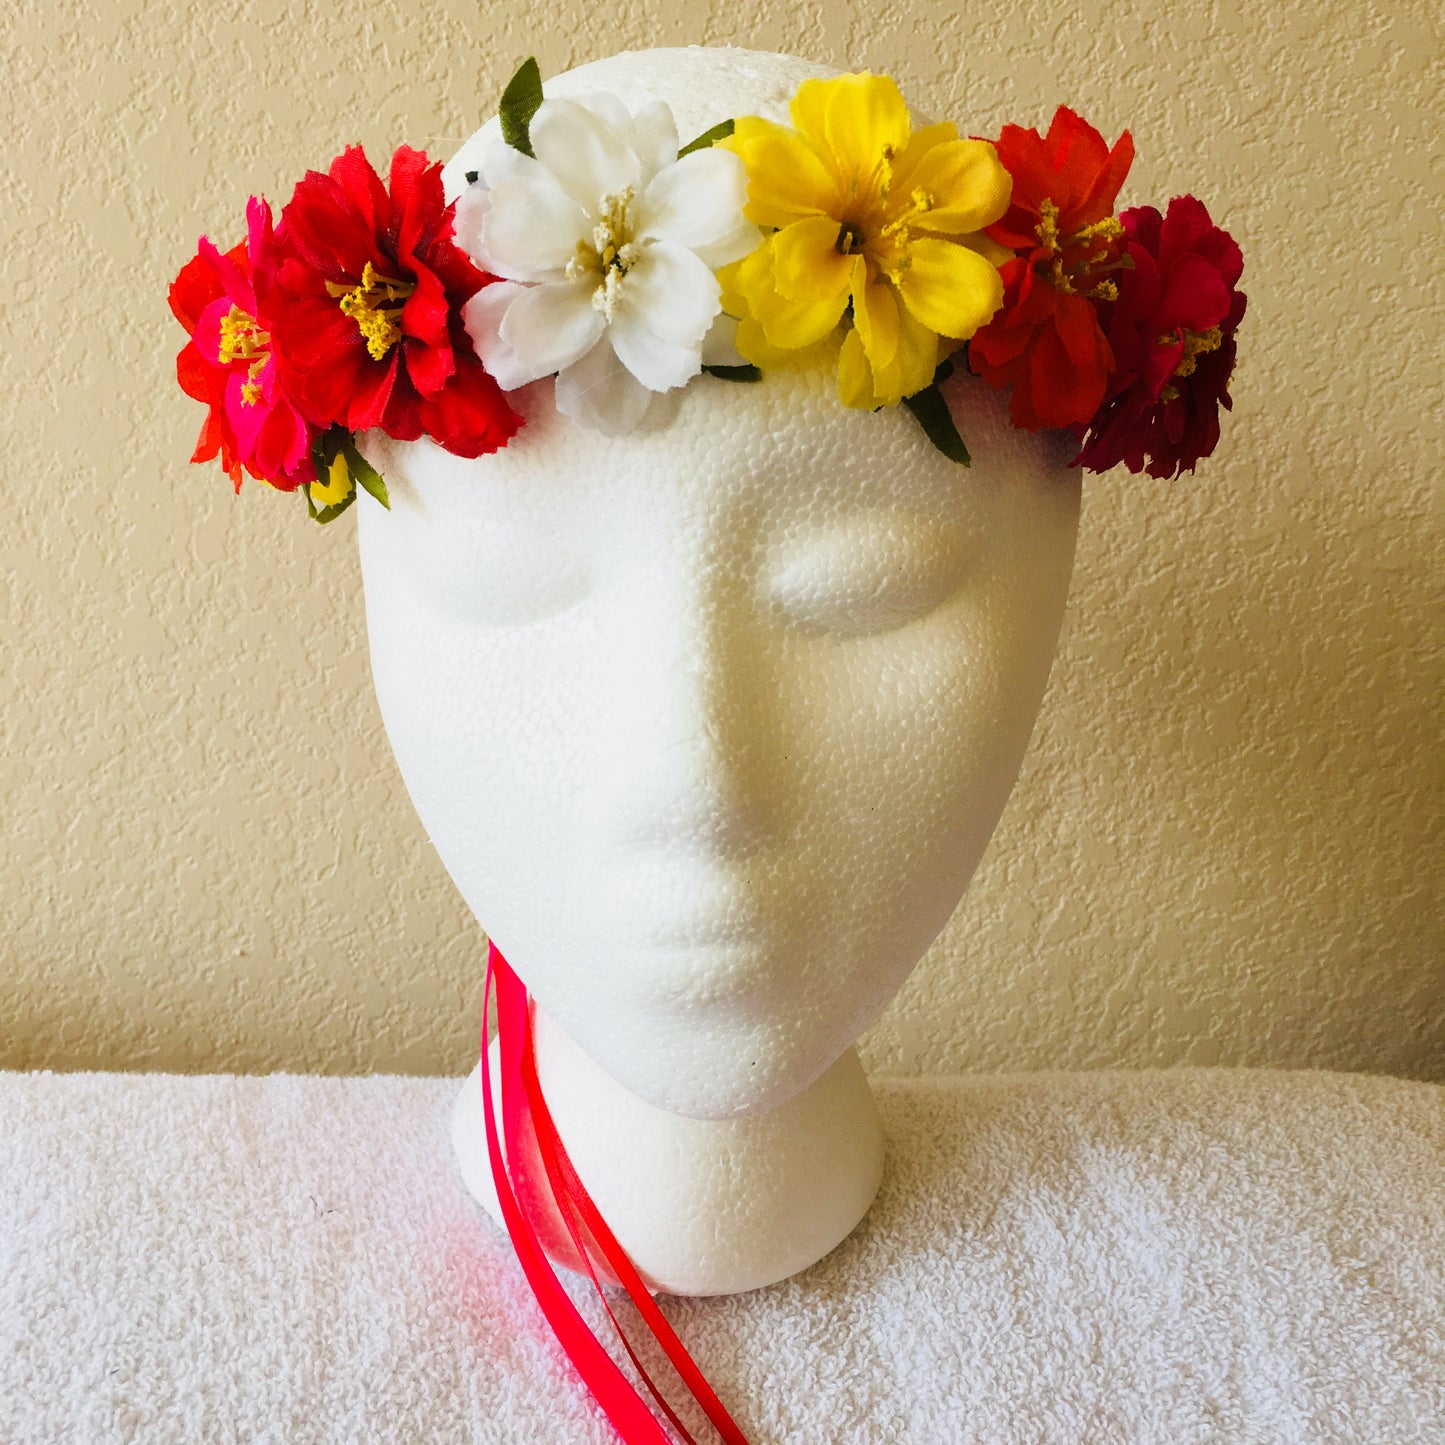 Extra Small Wreath - White, yellow, red, & pink flowers +